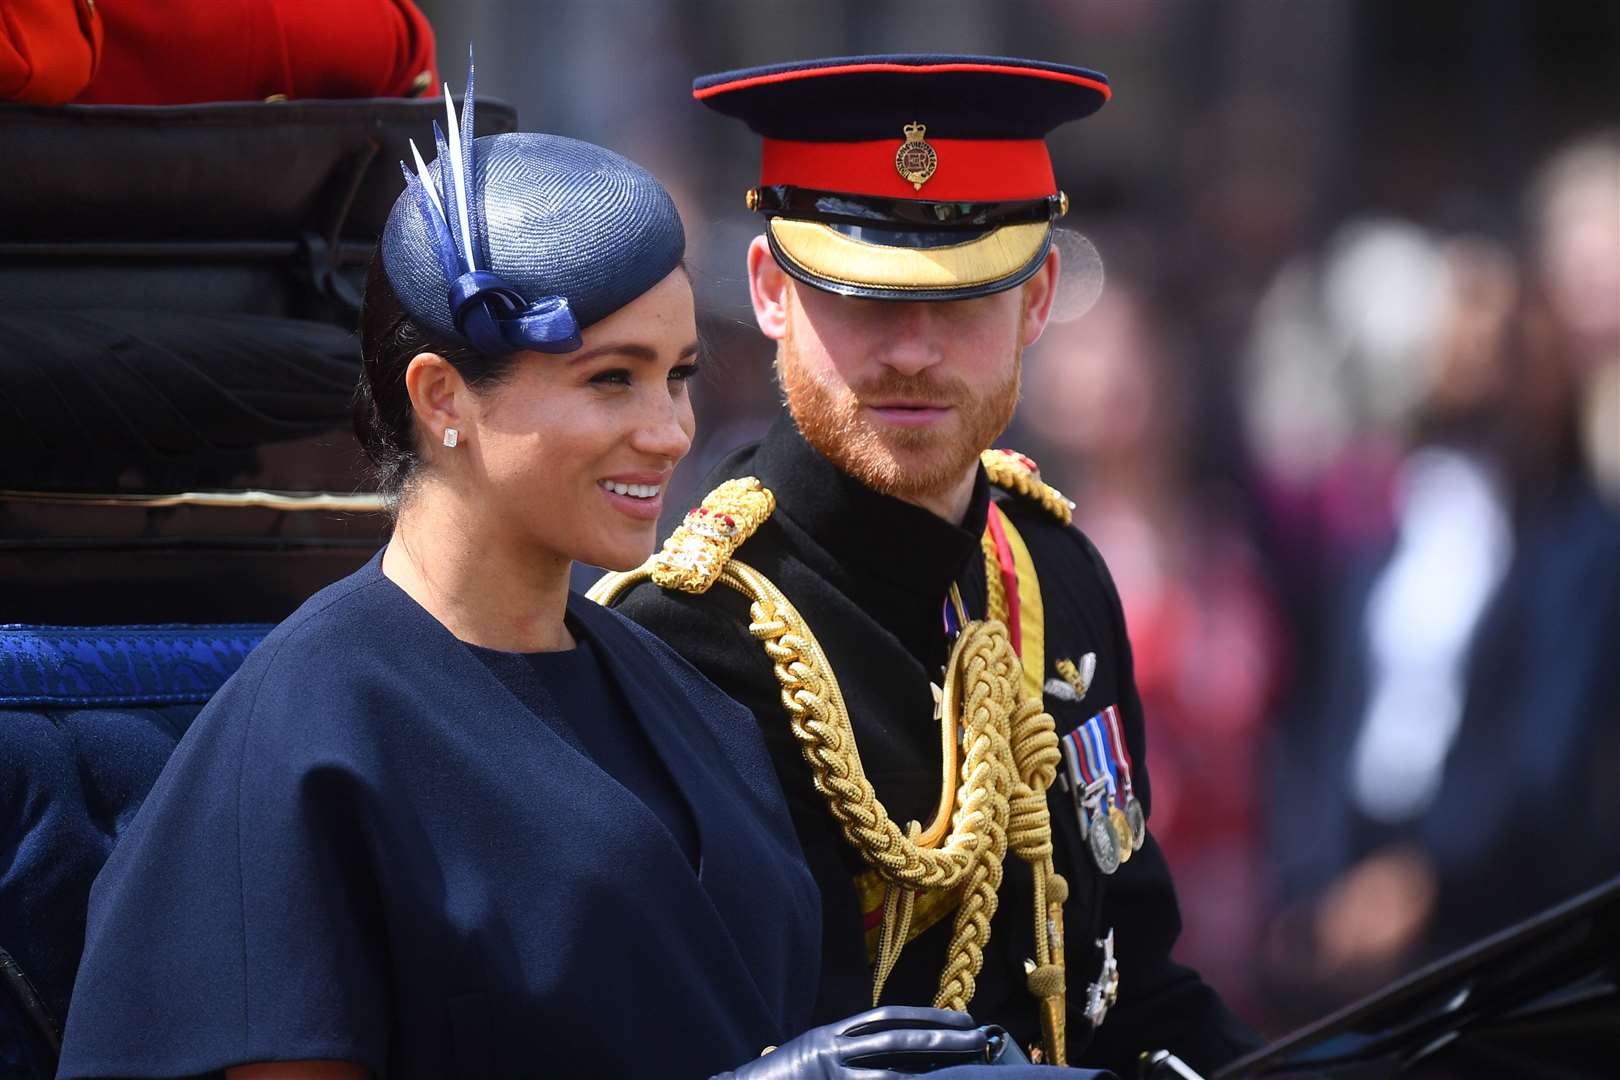 Meghan and Harry will join members of the royal family at the Trooping the Colour ceremony (Victoria Jones/PA)